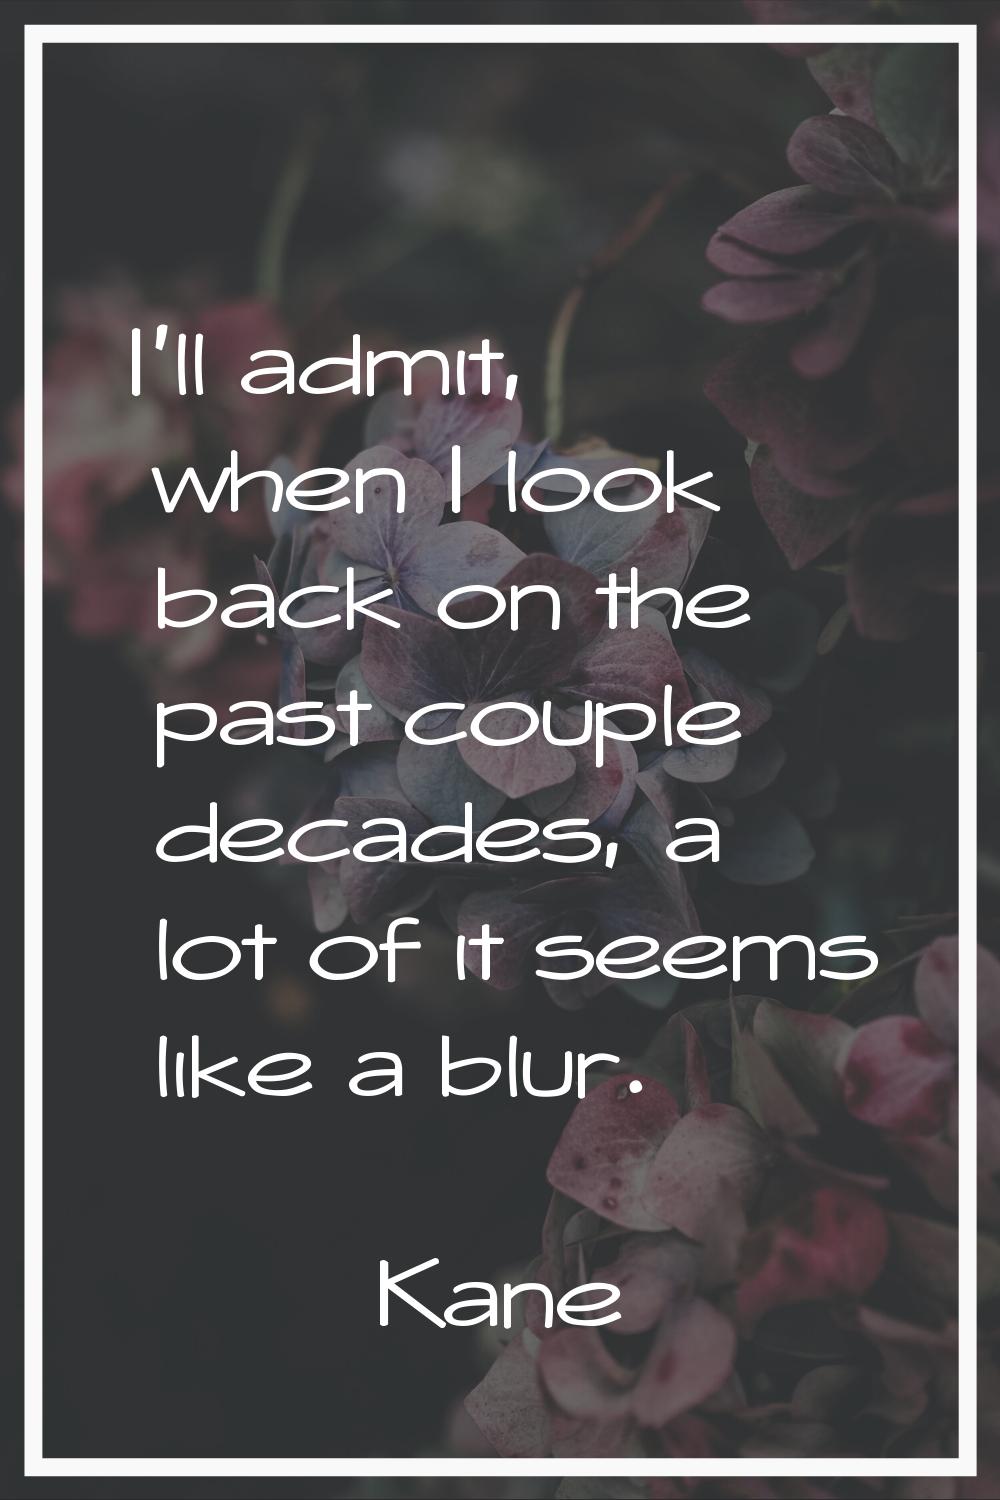 I'll admit, when I look back on the past couple decades, a lot of it seems like a blur.